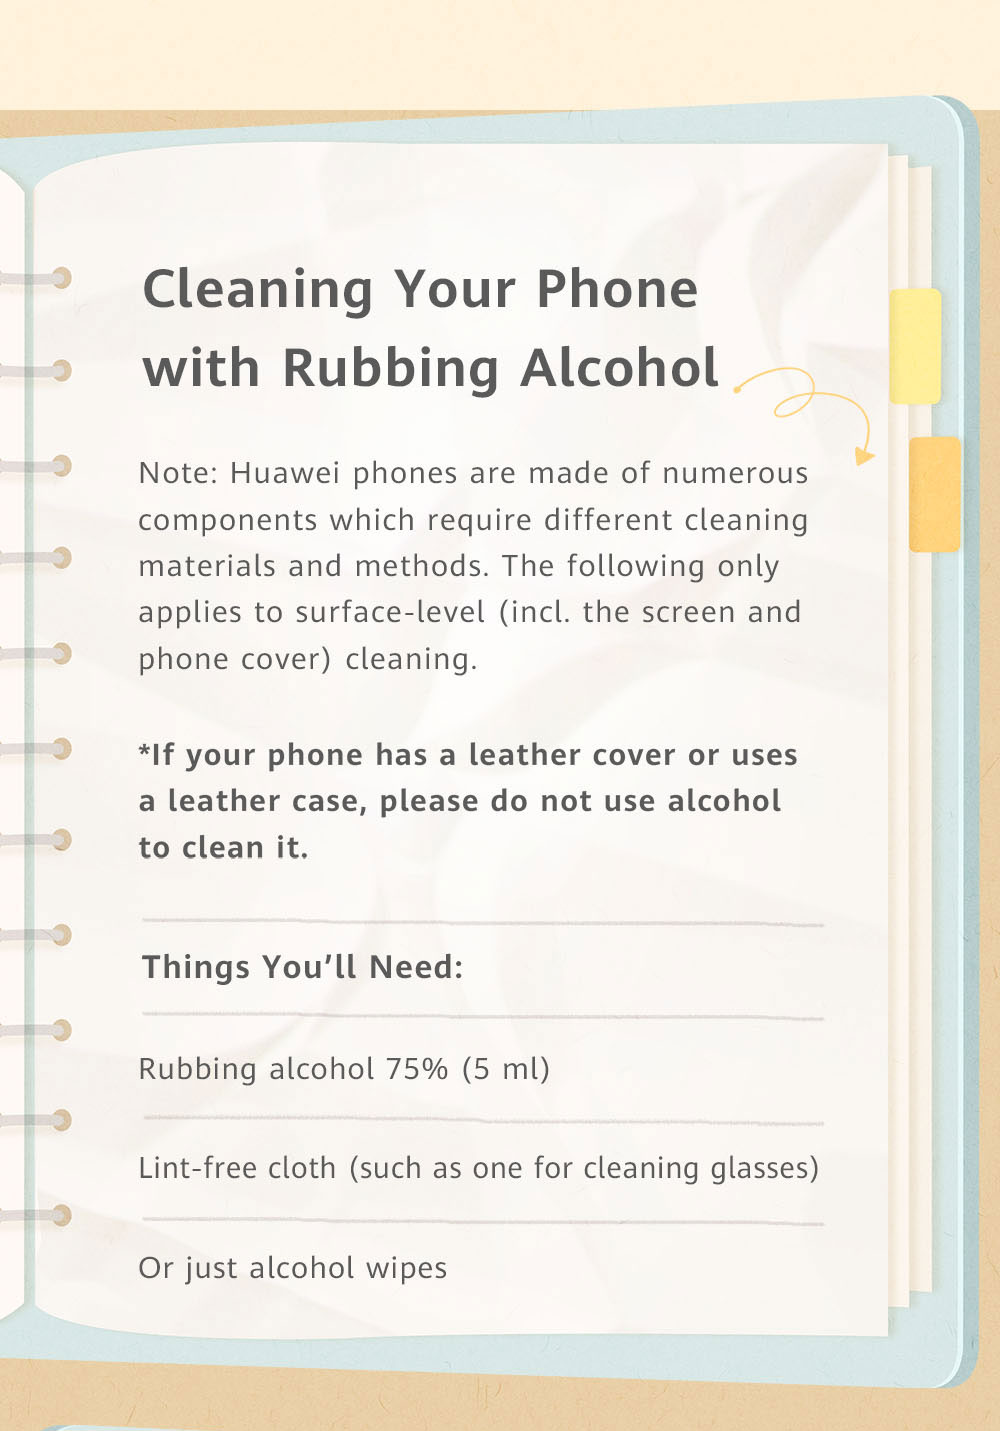 How to Clean Your Phone?